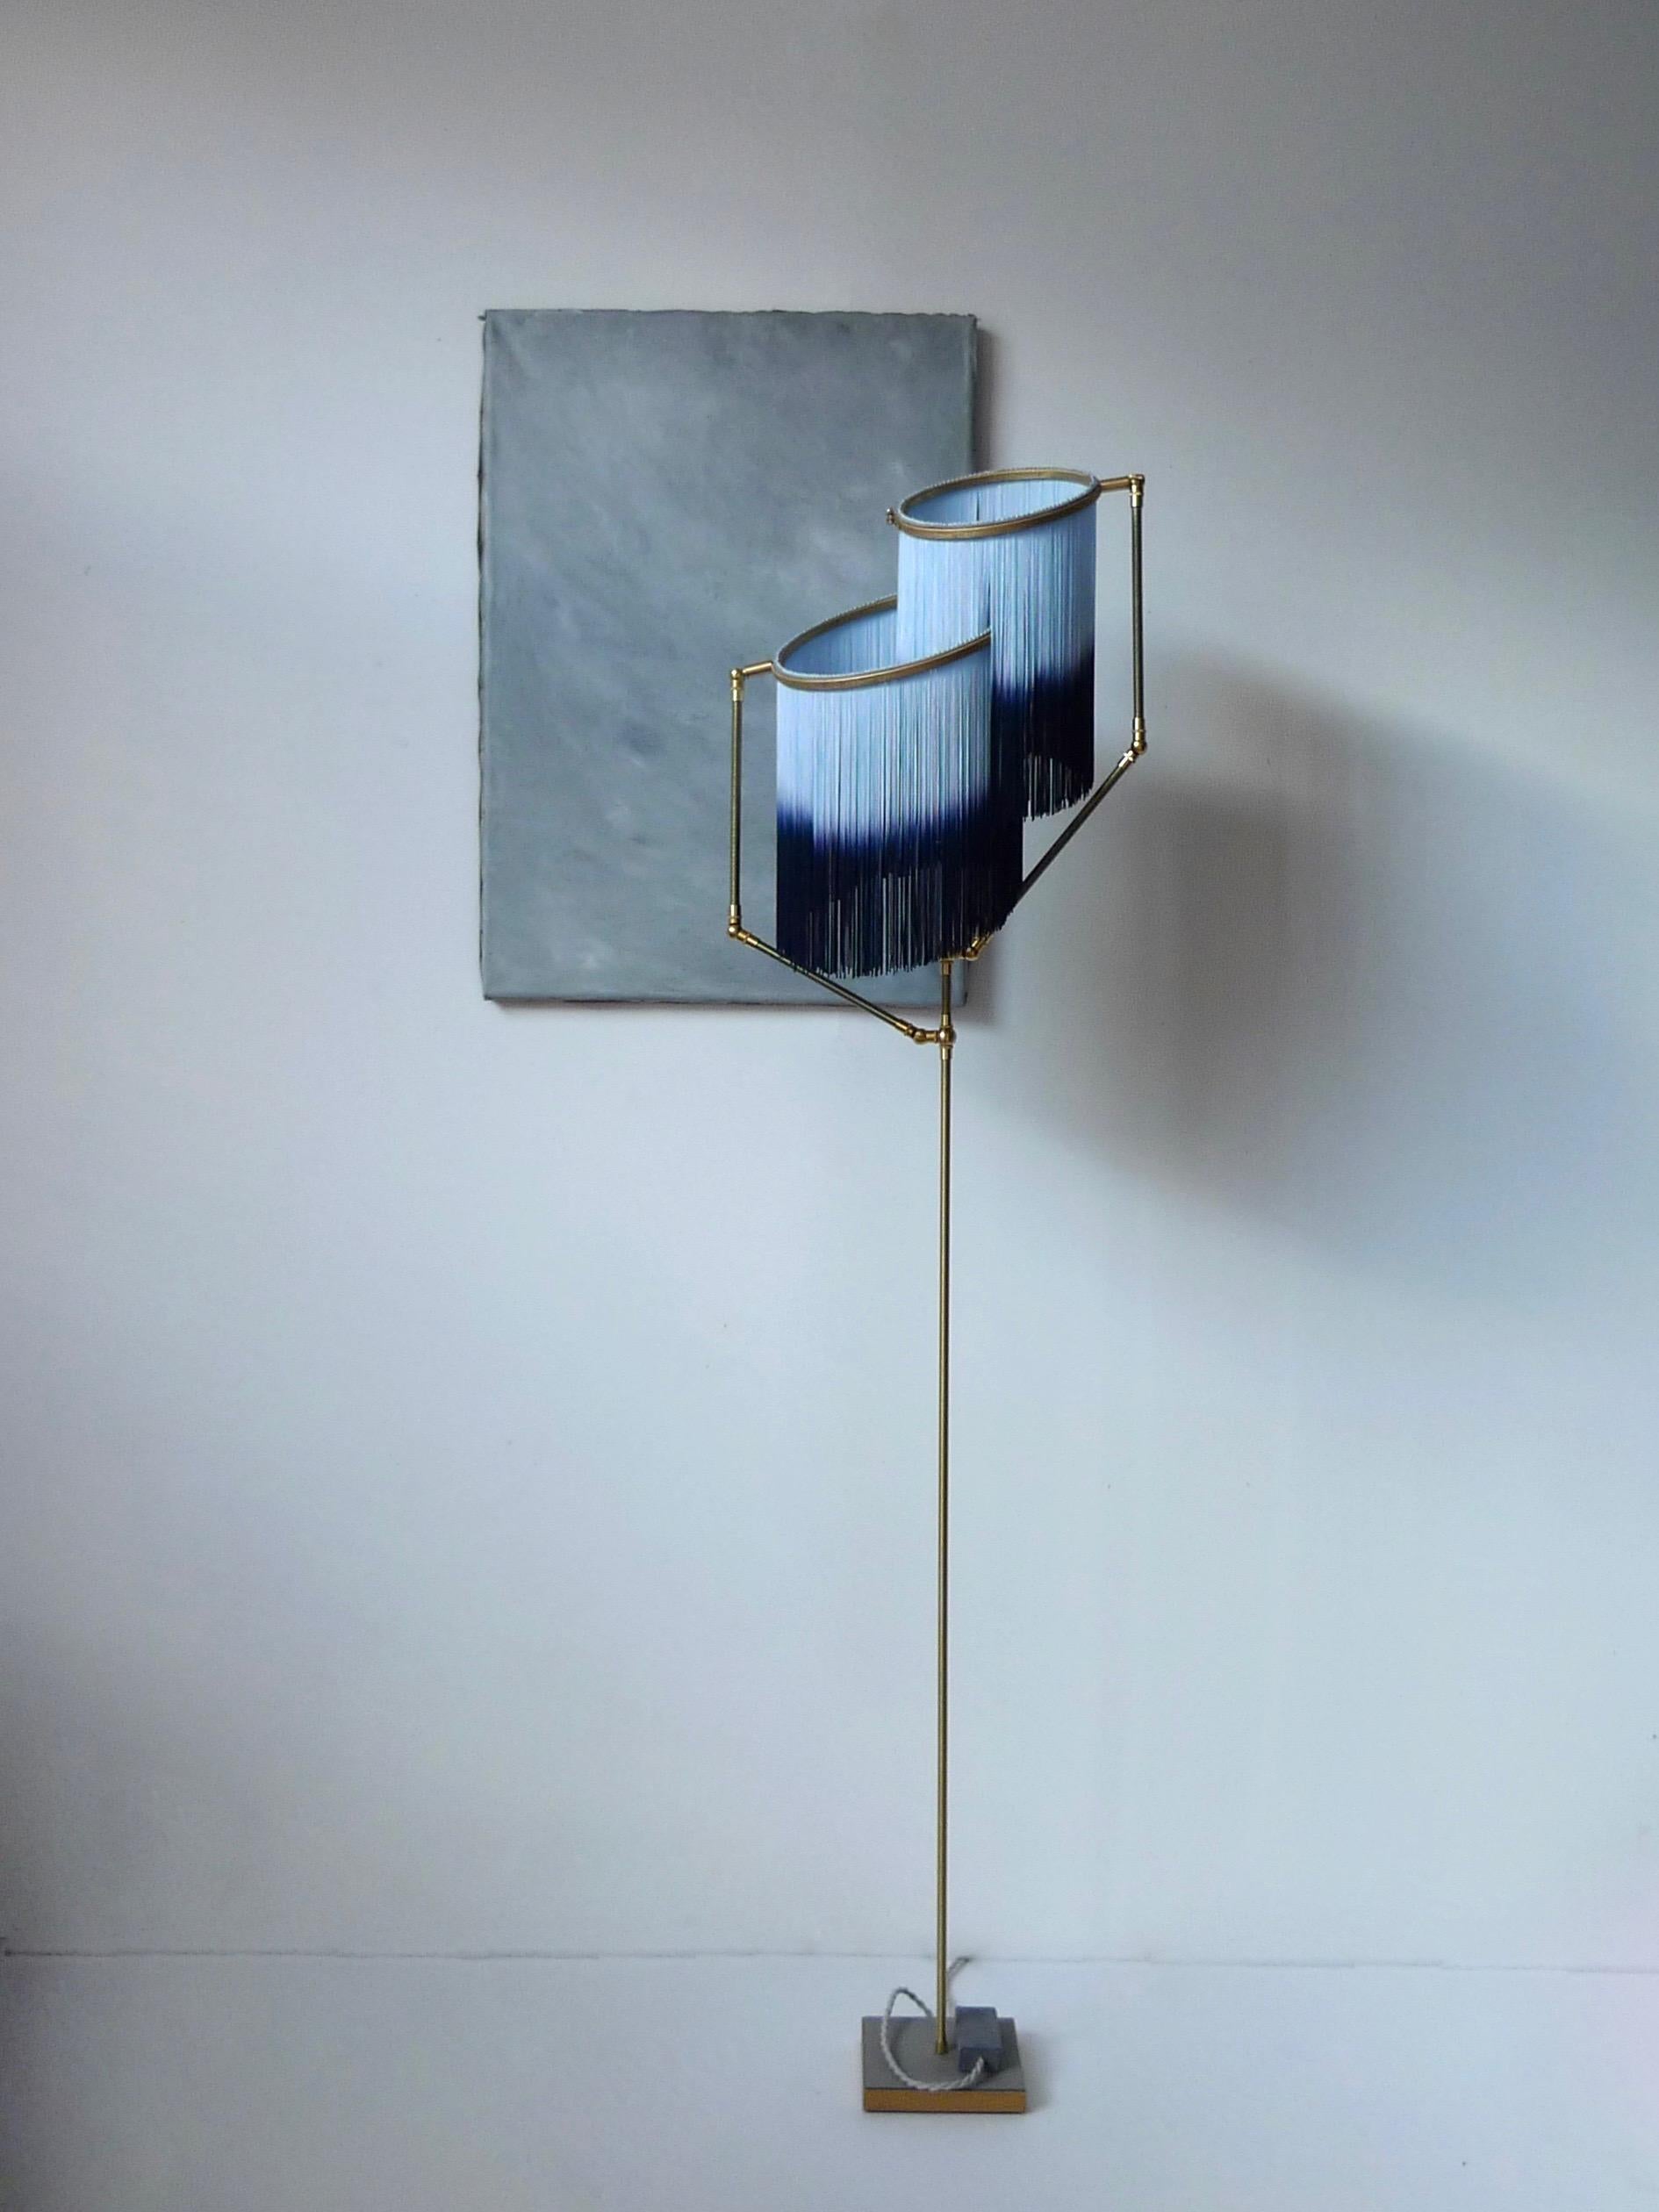 Blue charme floor lamp, Sander Bottinga

Dimensions: H 153 x W 38 x D 25 cm.
Hand-sculpted in brass, leather, wood and dip dyed colored fringes in viscose.
The movable arms makes it possible to move the circles with fringes in differed positions.
So